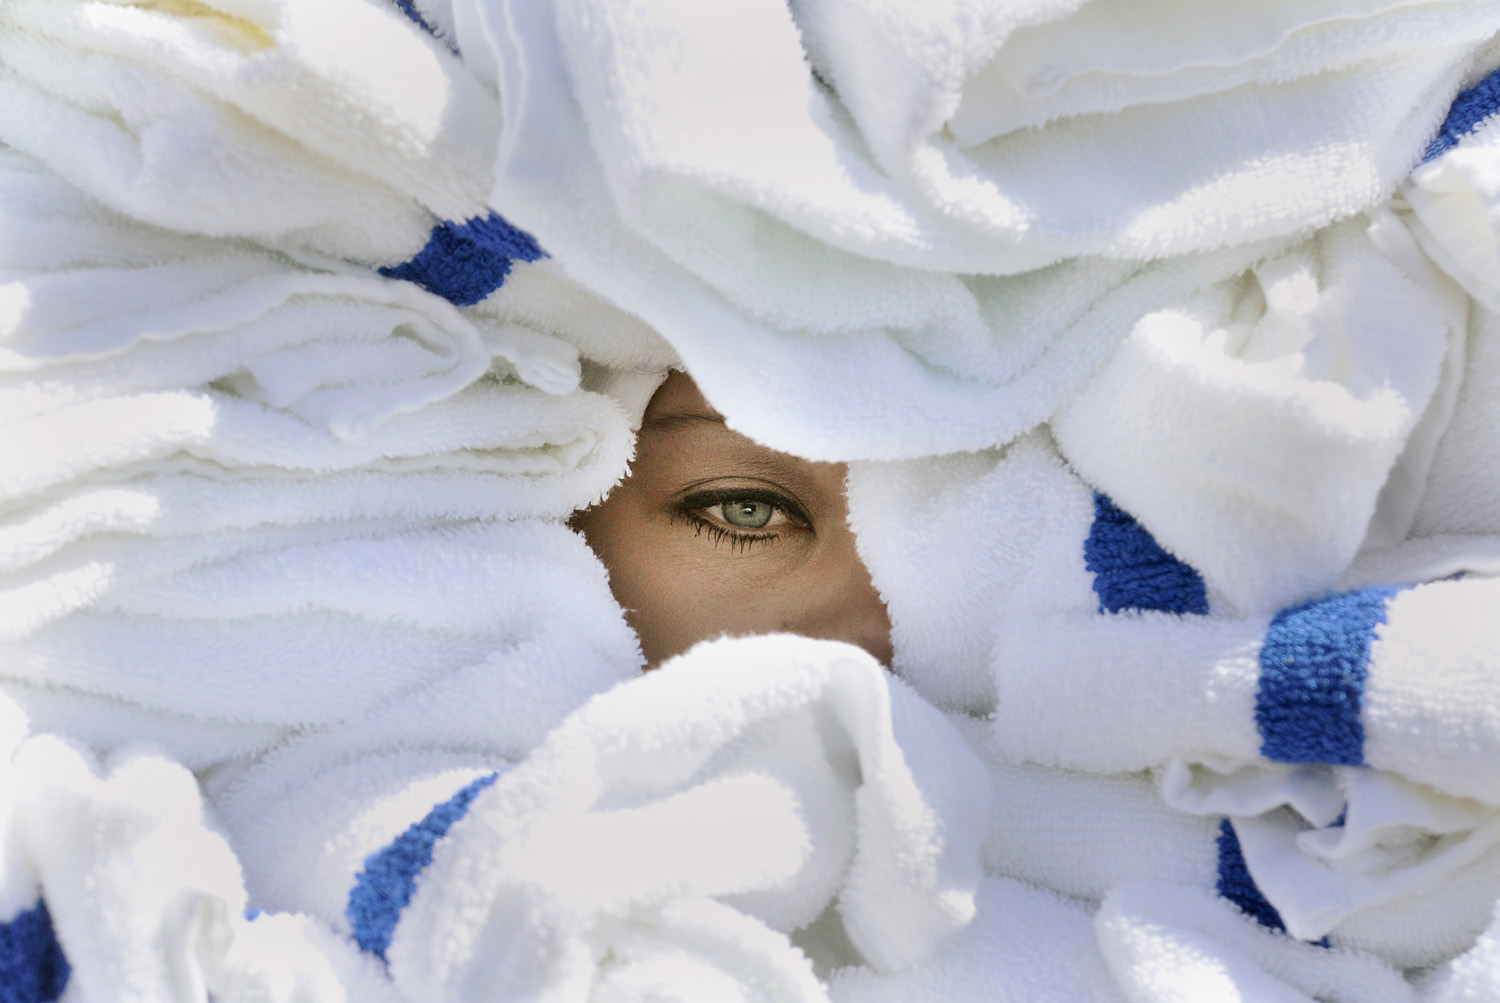 Rebecca Redwine from Grandma's in the Park has one eye visible from between nealry 100 towels as she competes in the towel carrying contest during the 10th annual Iron Range Housekeeping Olympics held Sept. 8, 2014, at American Lodge and Suites in Virginia, Minn.